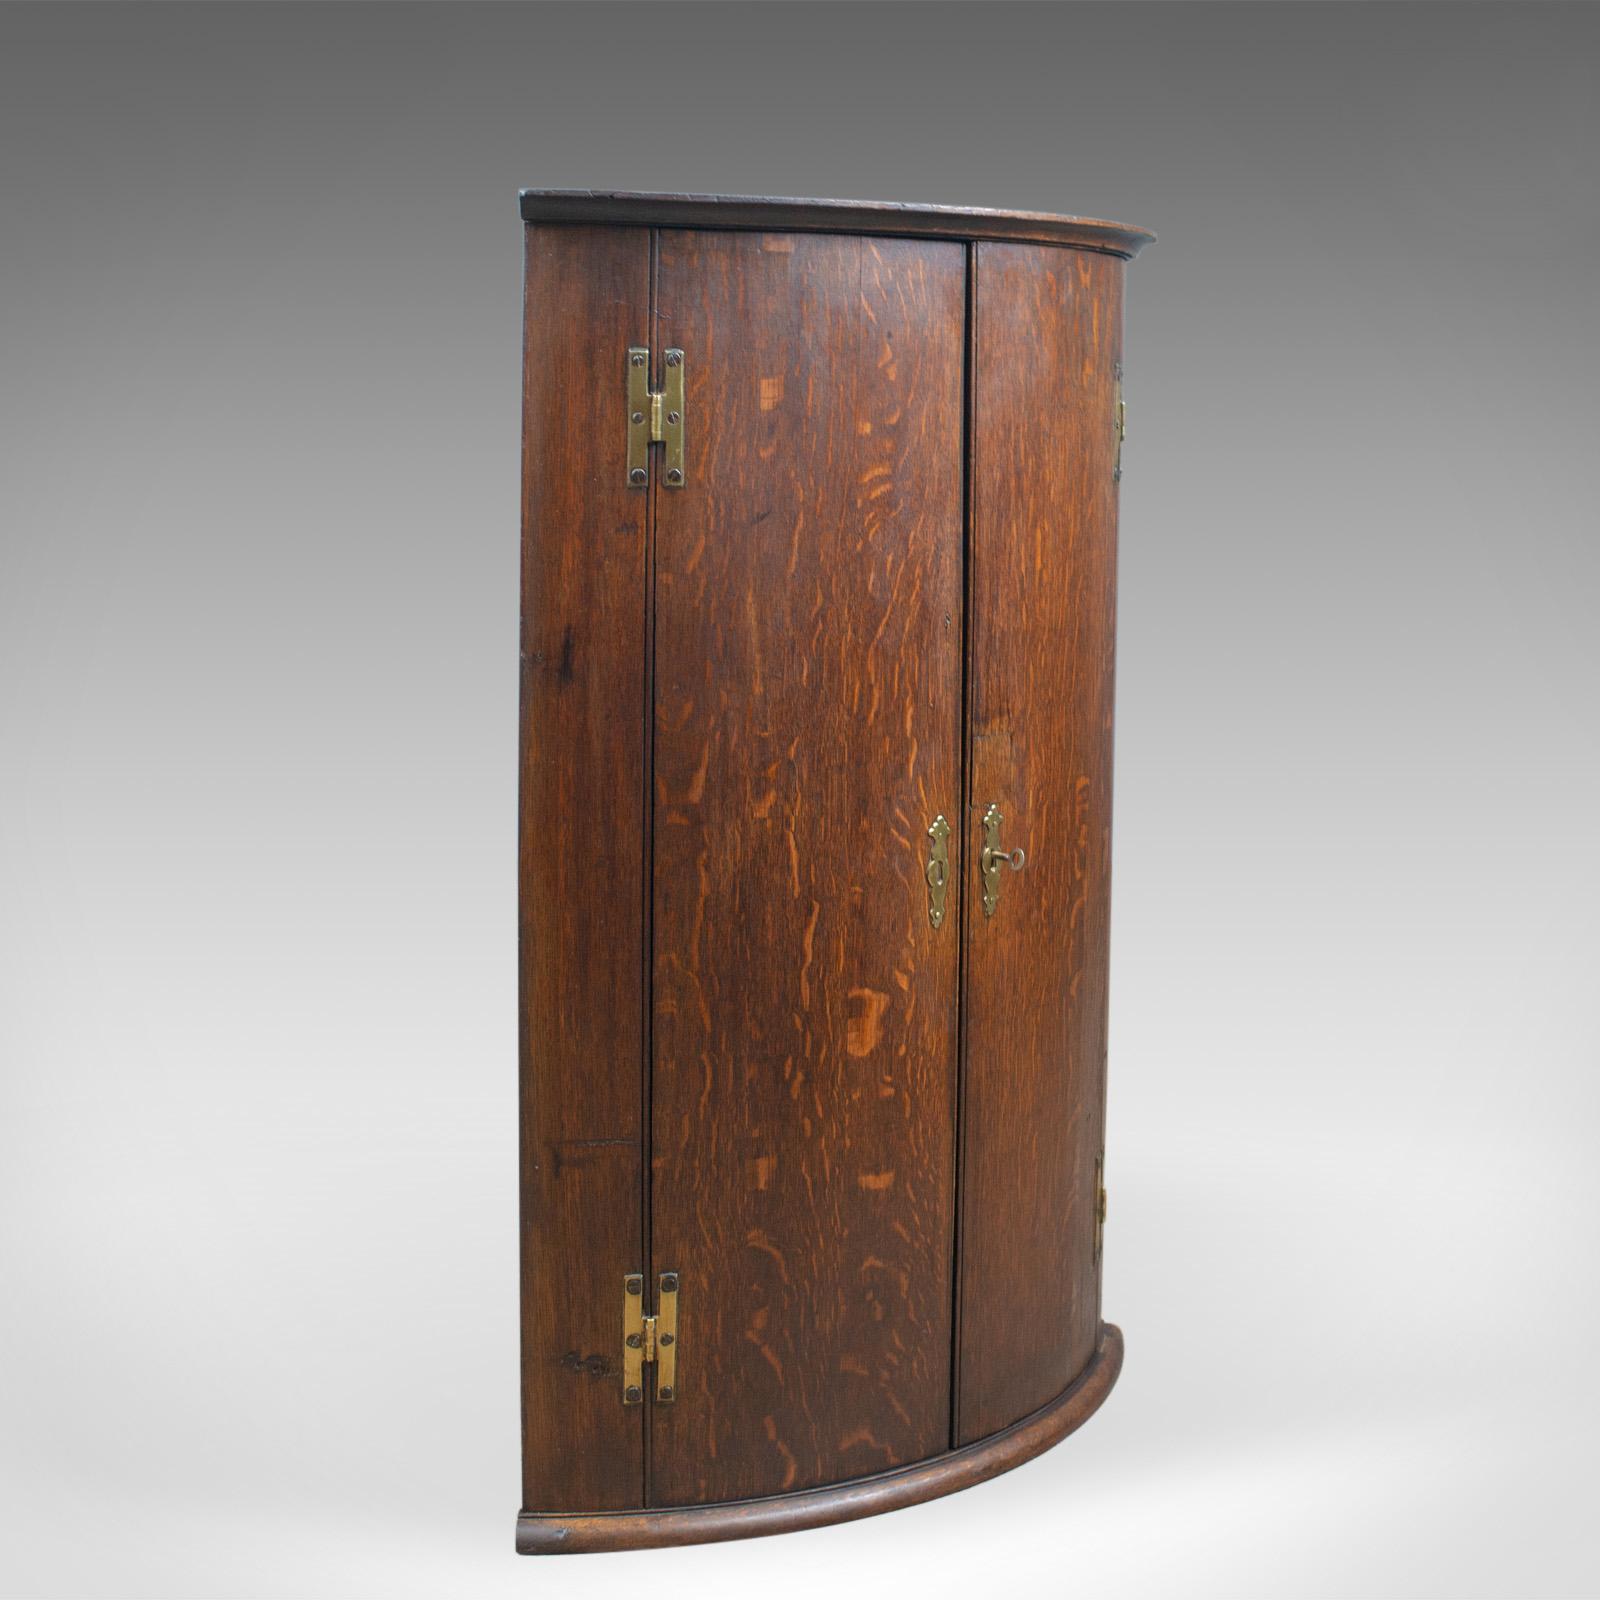 This is an antique bow fronted corner cabinet, an English, oak, Georgian, hanging cupboard dating to the 18th century, circa 1770.

In oak with a very desirable aged tone and fine quality graining
Displaying wisps of medullary rays in through the